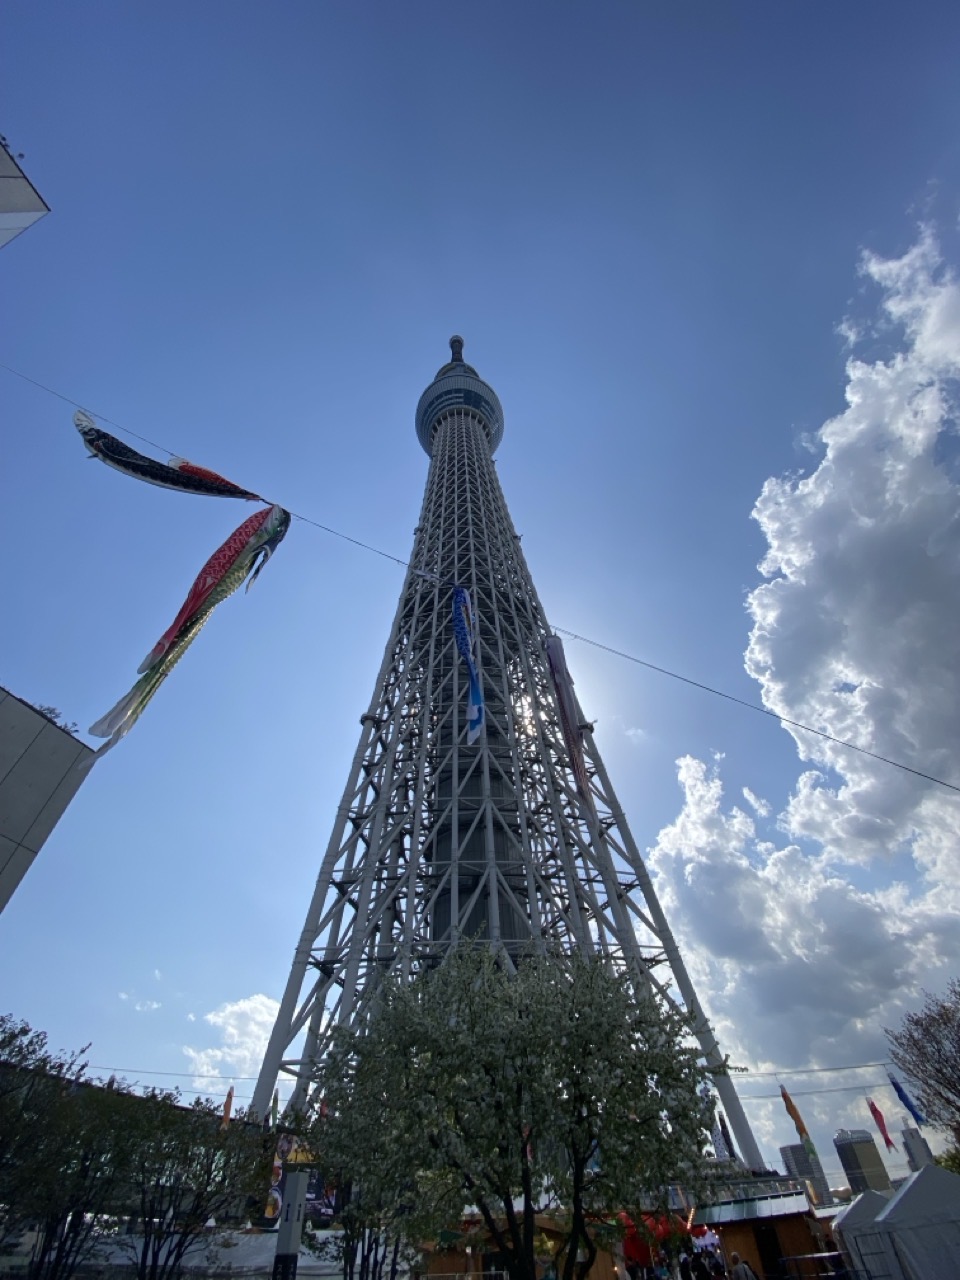 The sky tree tower seen from the ground